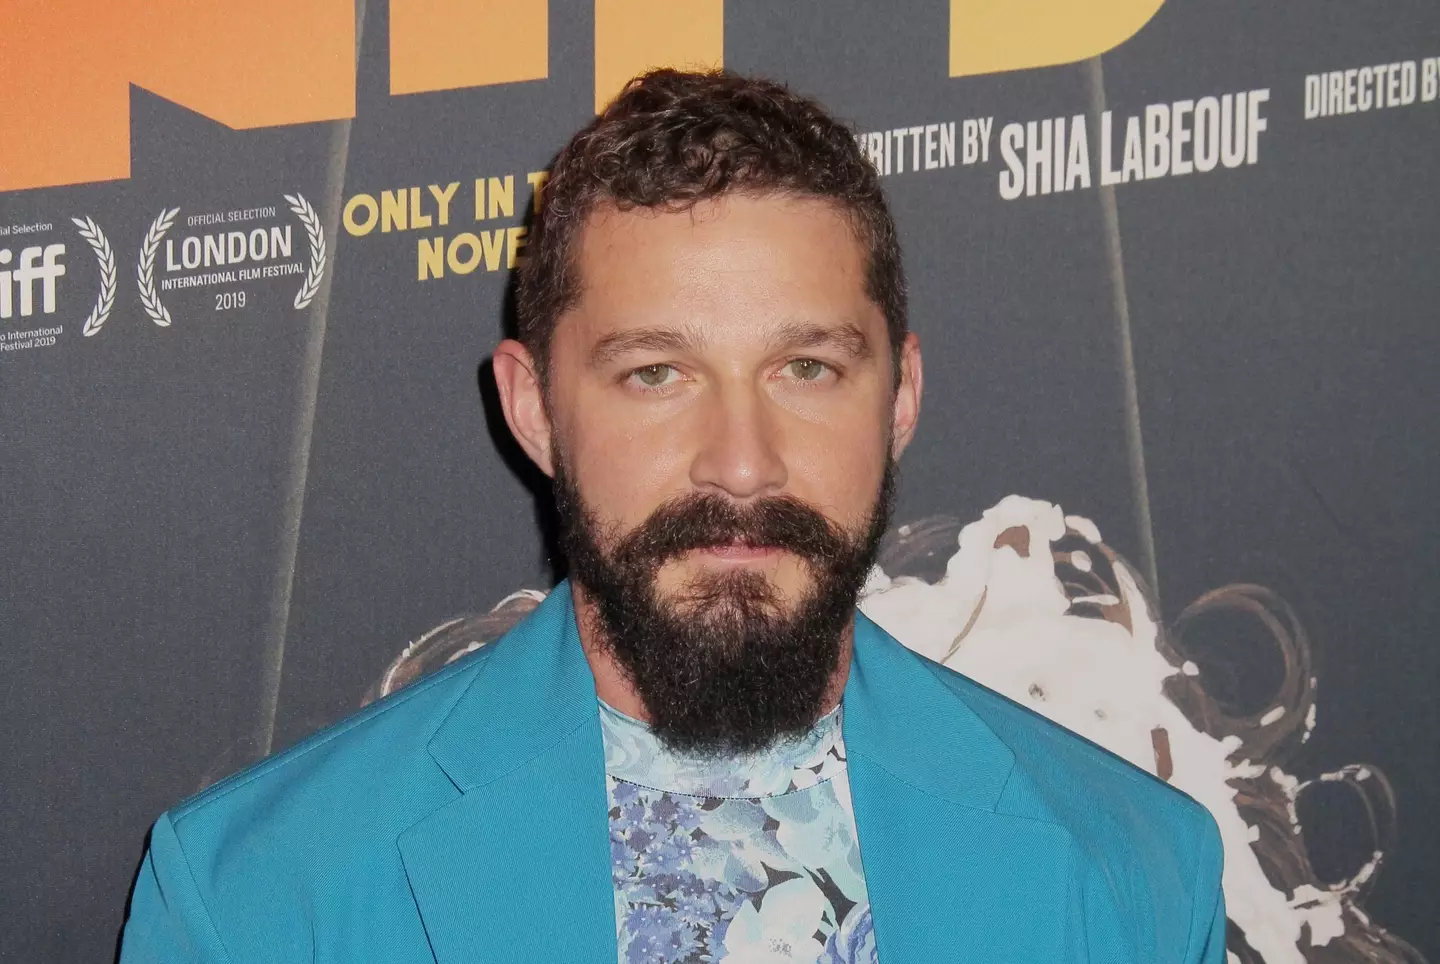 Shia LaBeouf sought to discredit Wilde's claims with video footage.